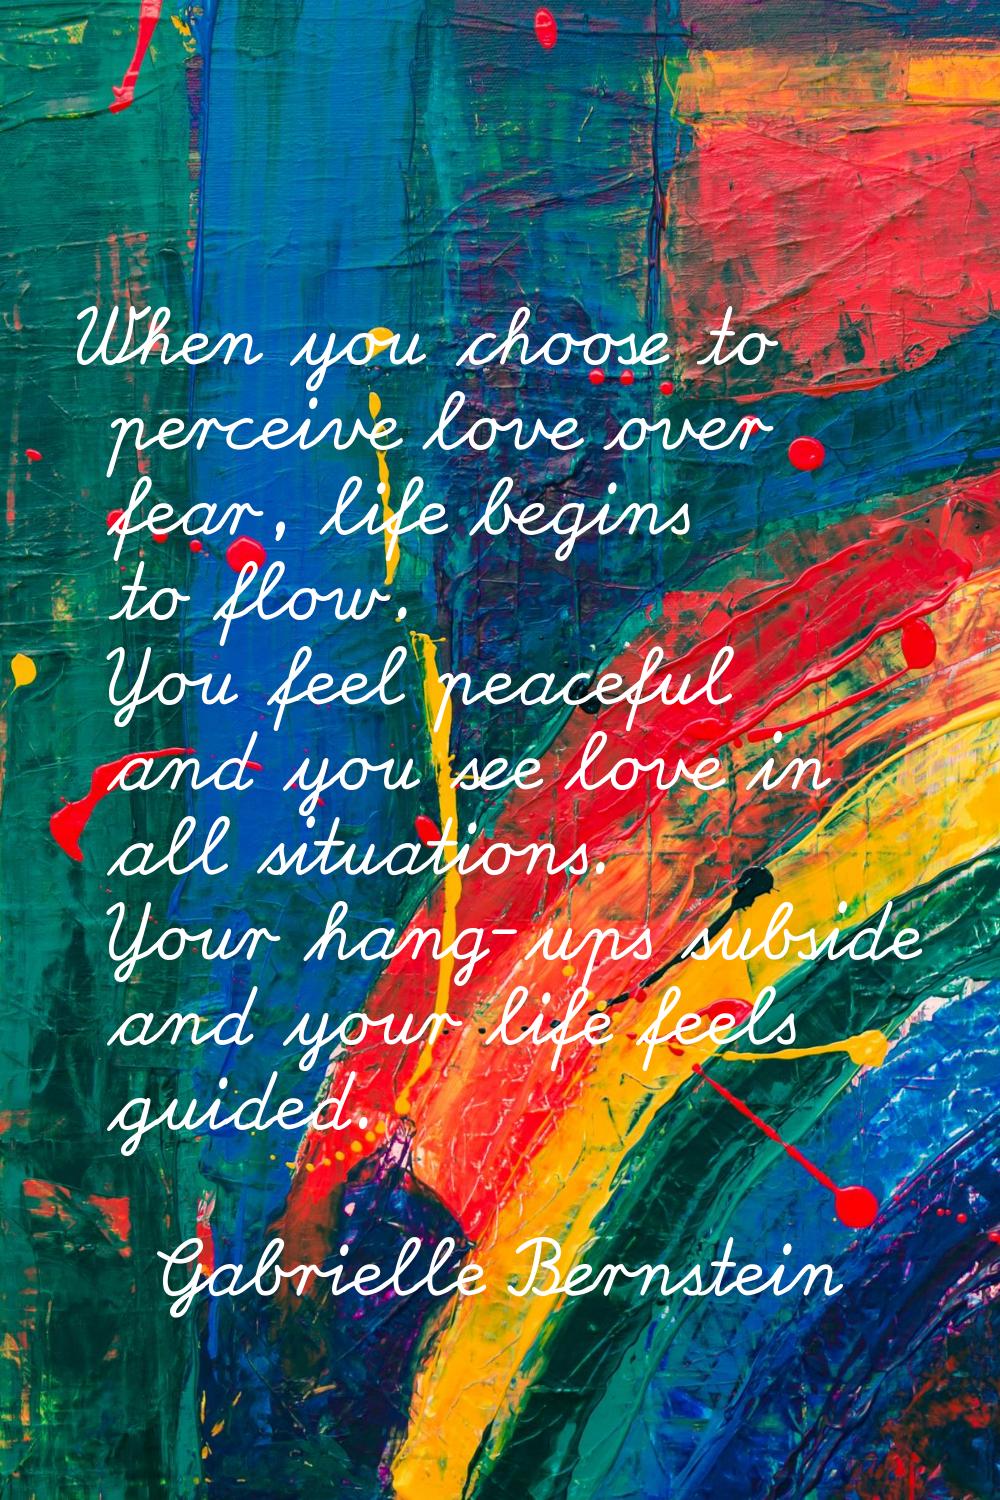 When you choose to perceive love over fear, life begins to flow. You feel peaceful and you see love